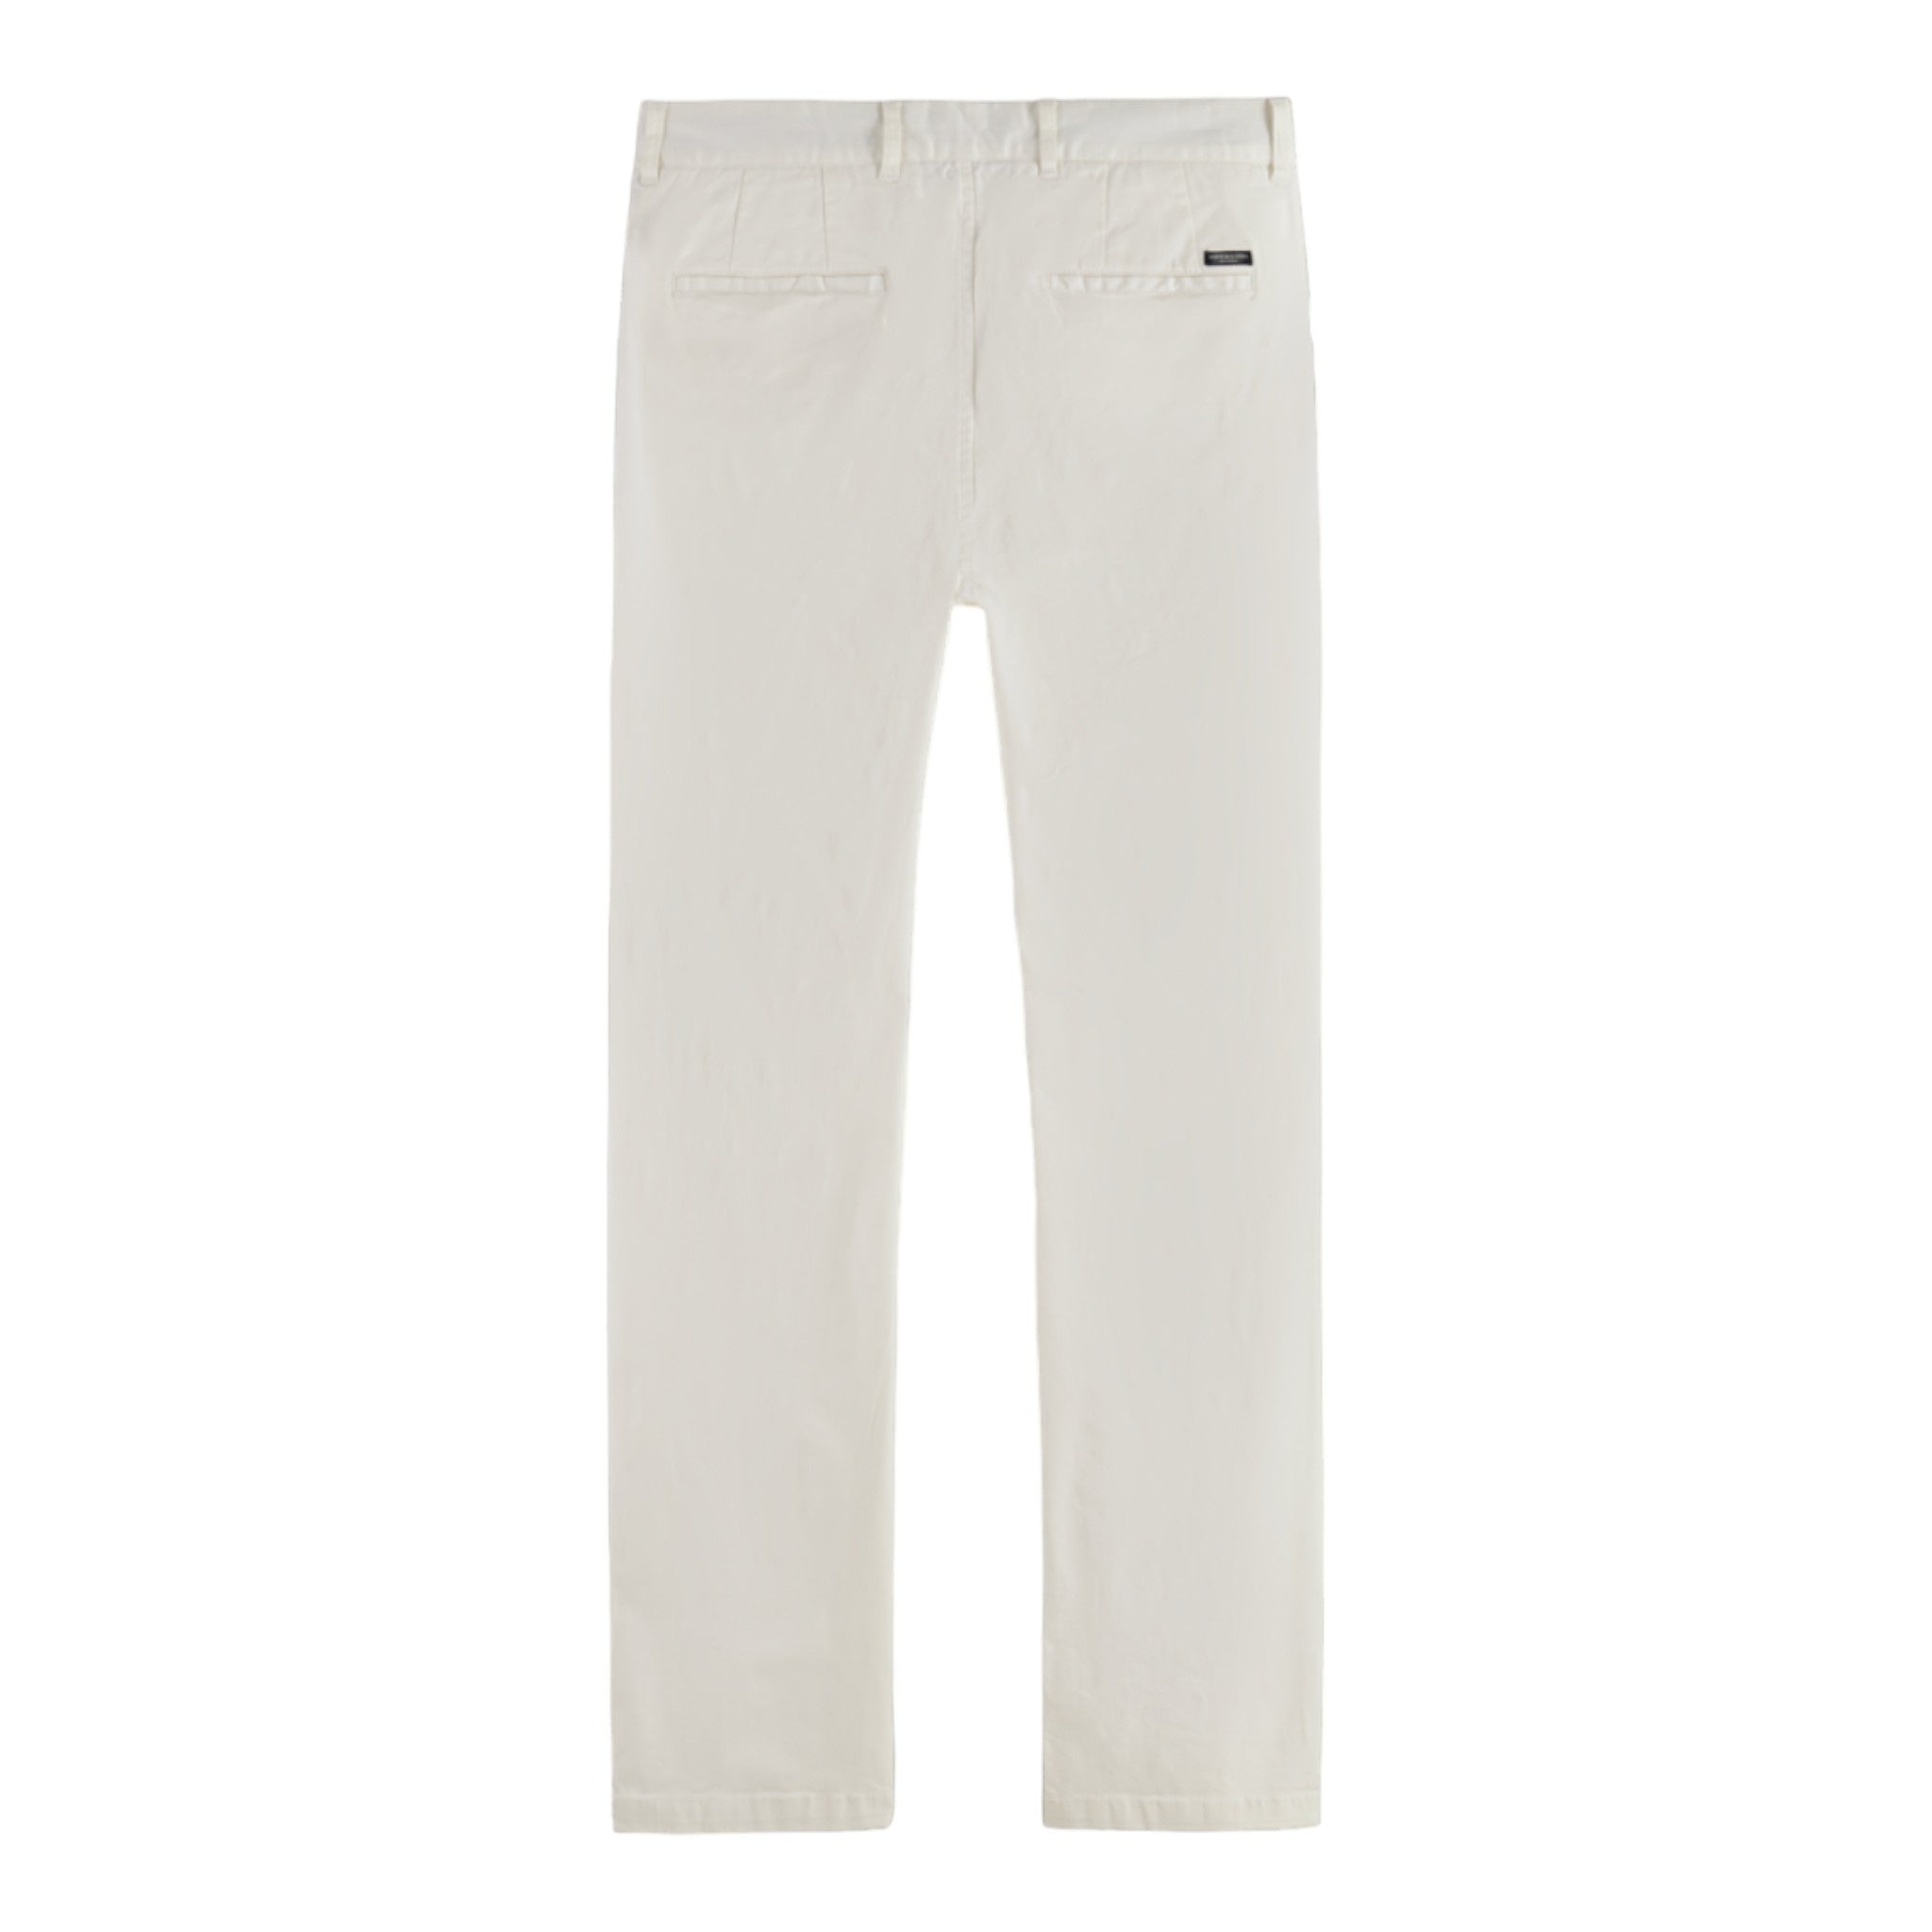 White fitted pants with two back pockets